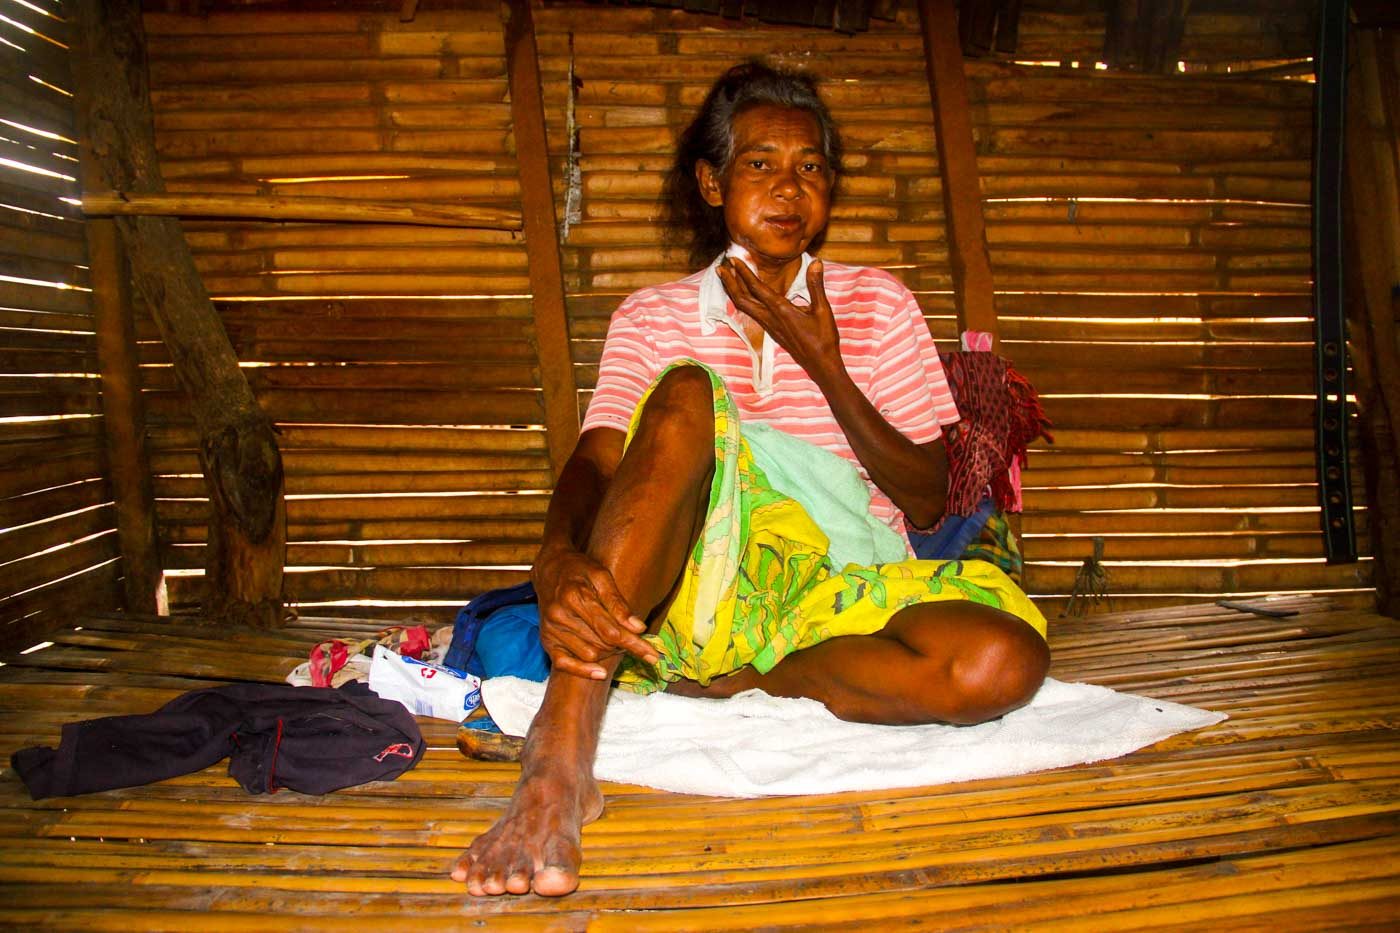 DOCUMENTED CASE. Claudia Vargas, 58, is one of 4 members of the Agta-tabangon tribe known to be suffering from mouth cancer. Photo by Rhaydz B. Barcia/Rappler  